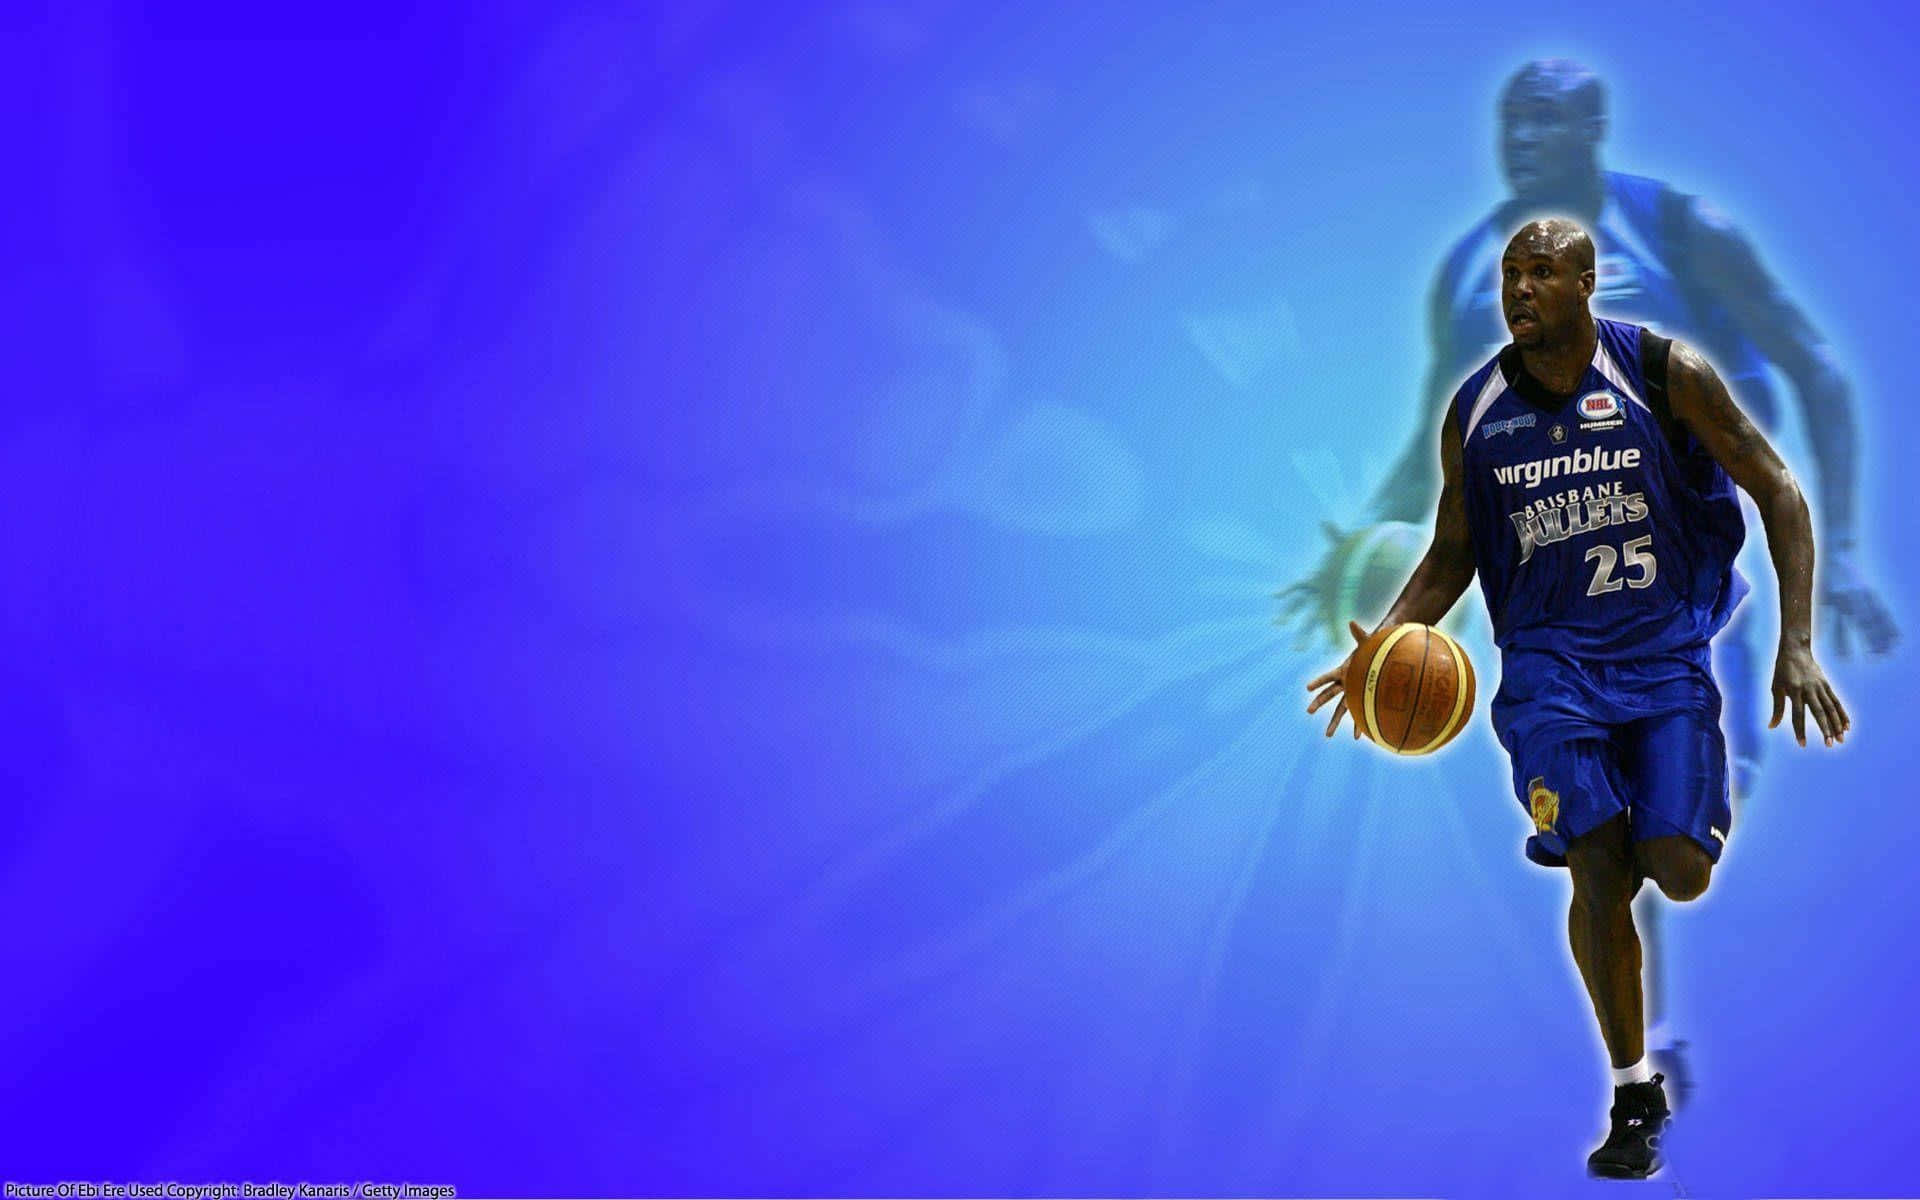 Play some ball with the Blue Basketball! Wallpaper